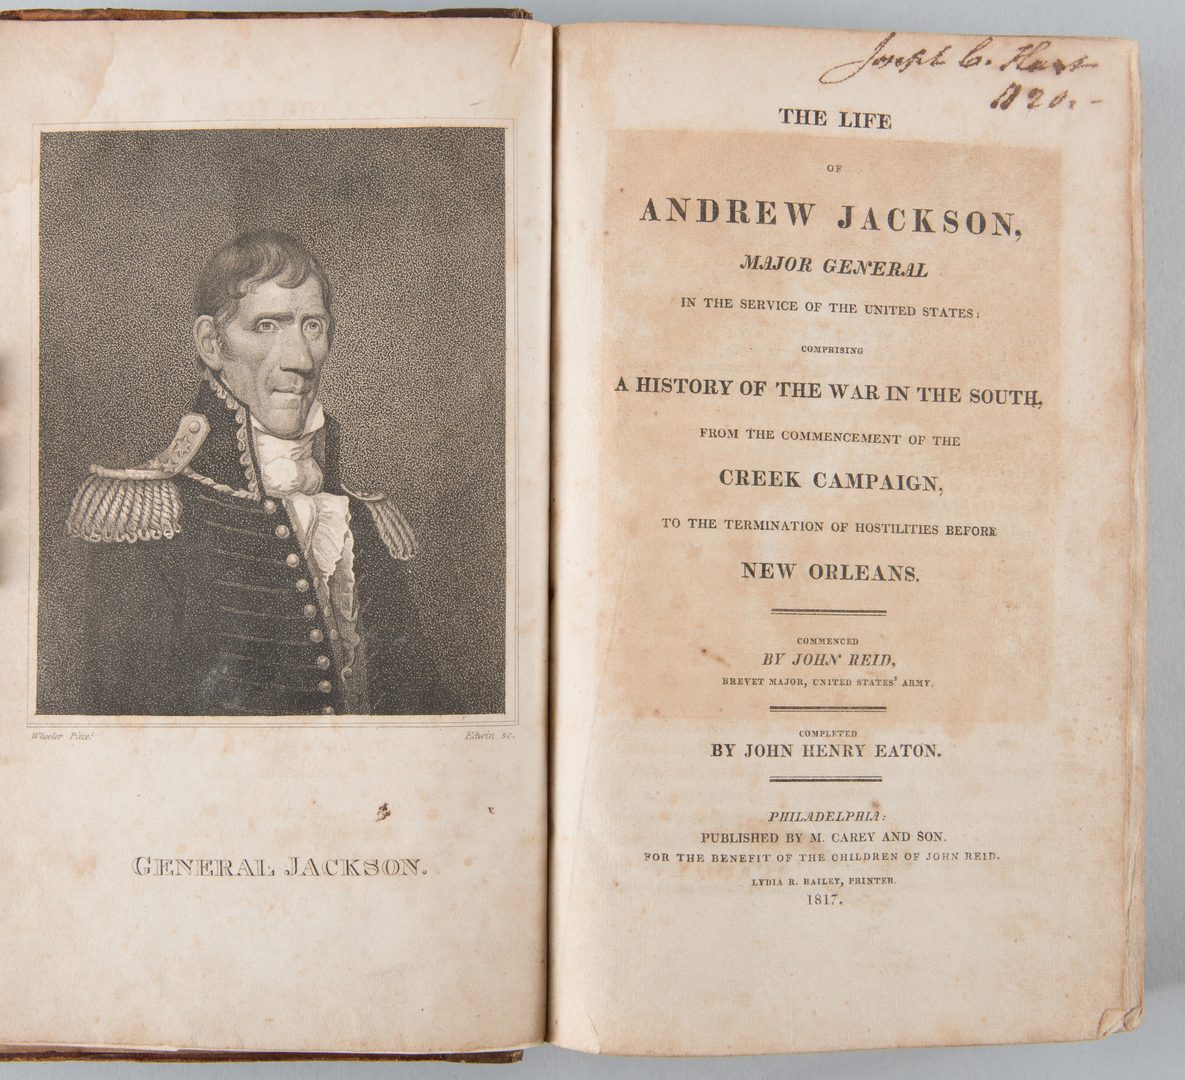 The Life of Andrew Jackson was a mythological portrait of Jackson that cast him as a living savior and god, a direct descendant of the newly mythologized Founding Fathers.It portrayed Jackson as an infallible man of destiny and cleaned up his scandals.8/